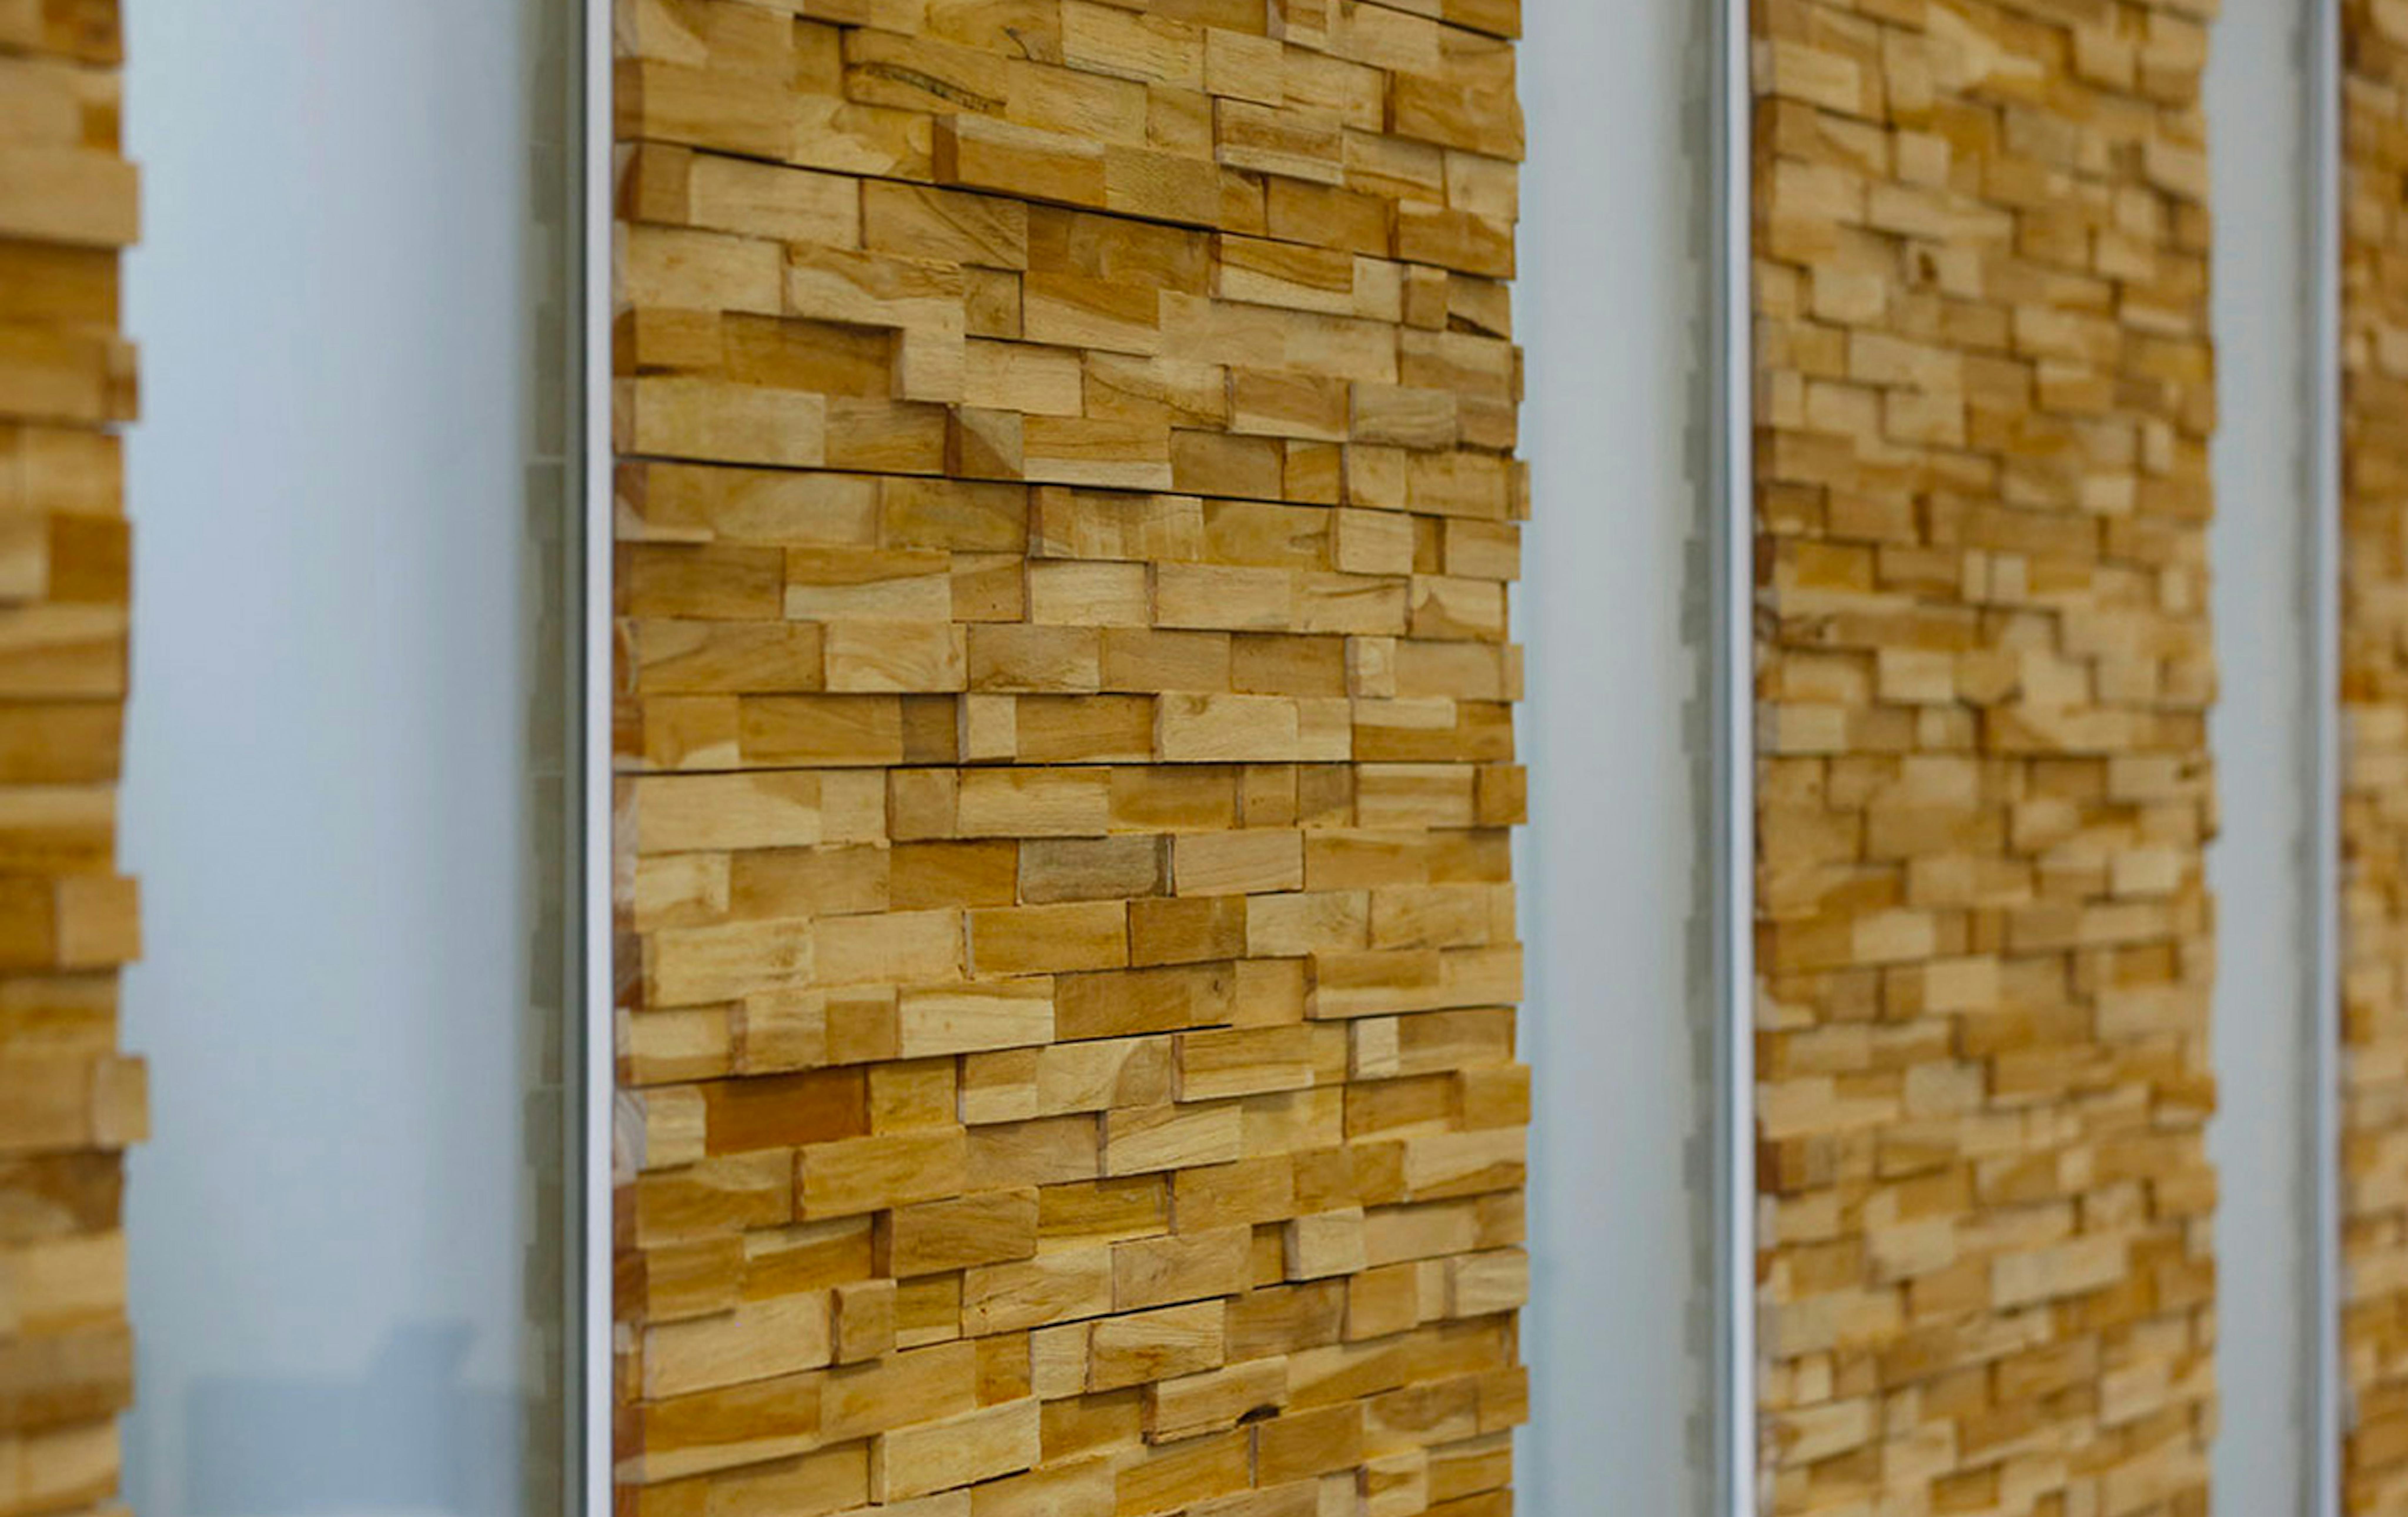 The door and surrounding wall surfaces -  finished in stacked timber blocks, creating texture and character.